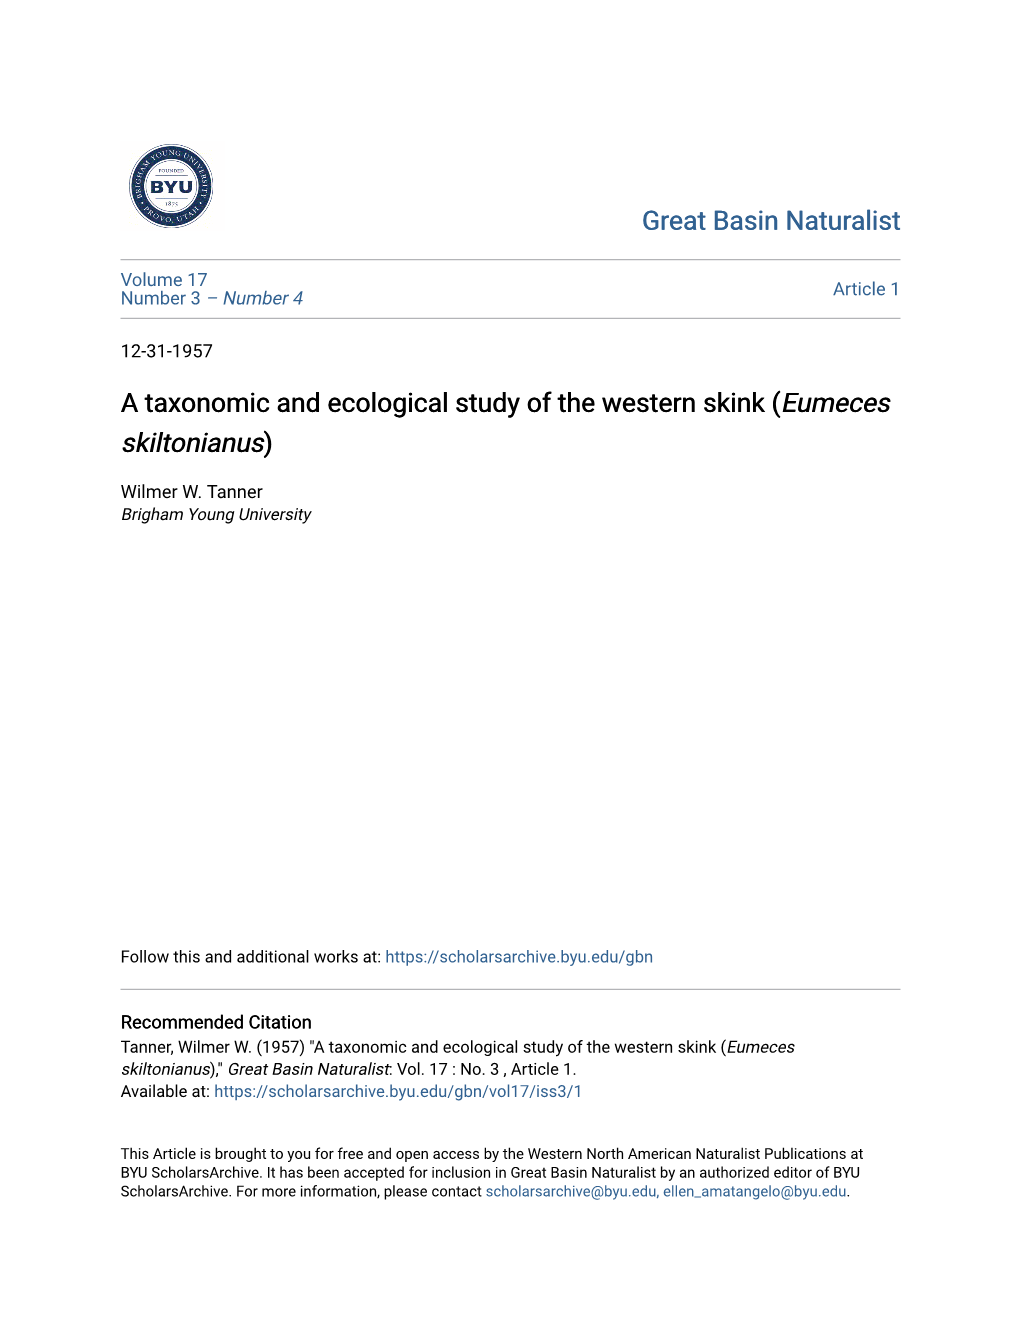 A Taxonomic and Ecological Study of the Western Skink (Eumeces Skiltonianus)